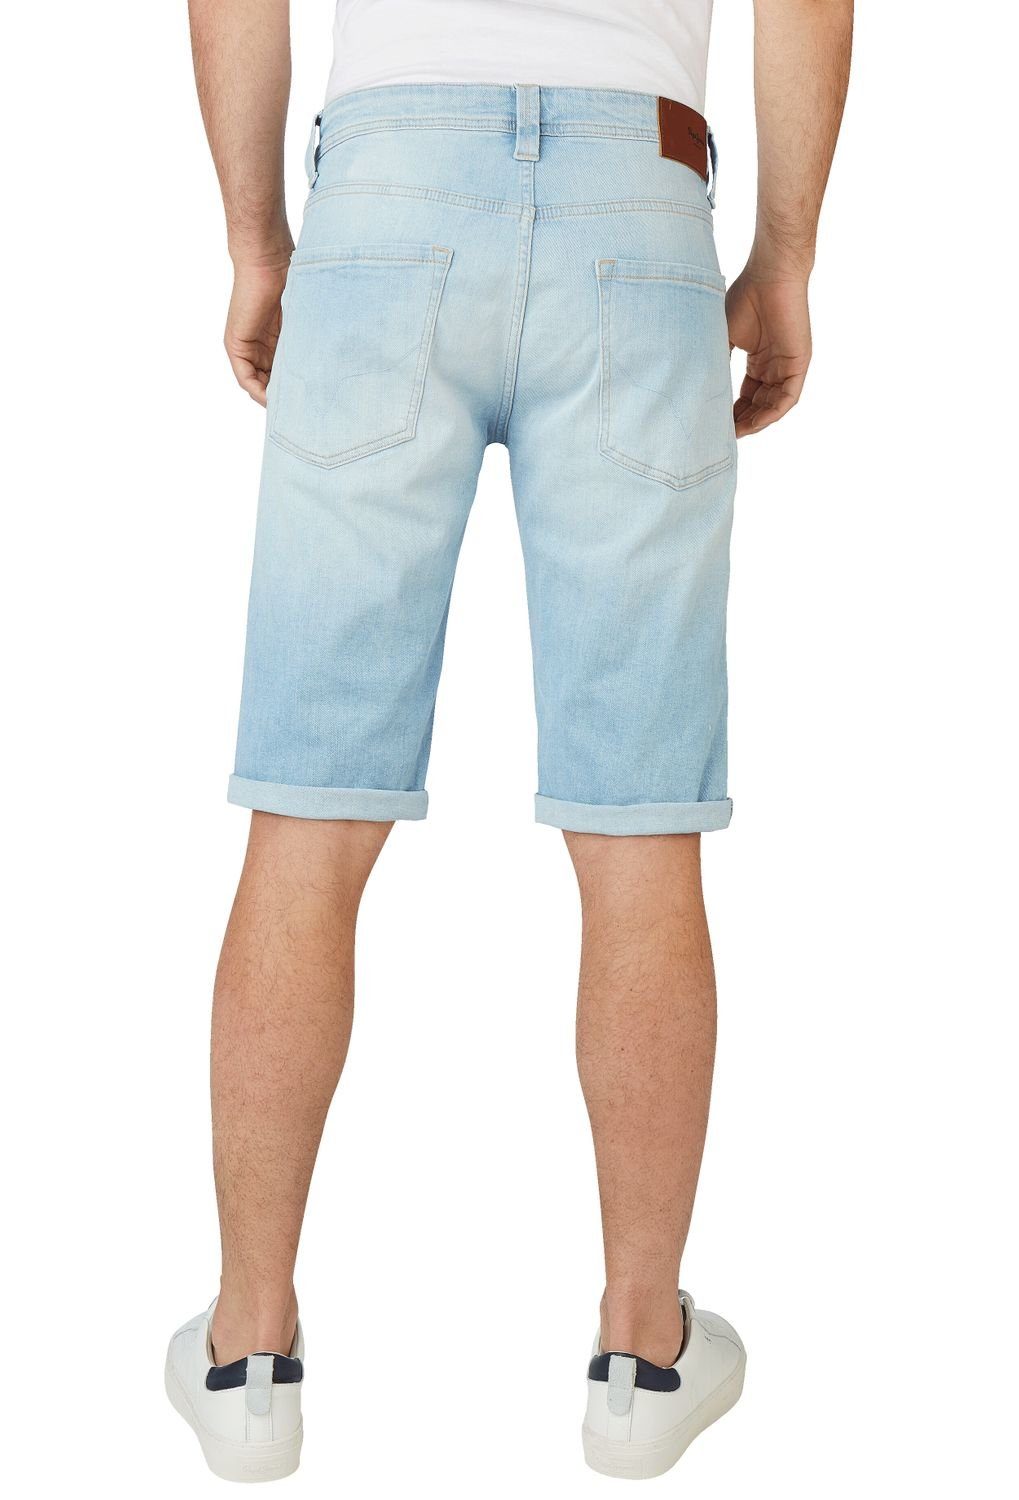 Jeansshorts Stretch mit CASH Pepe Jeans